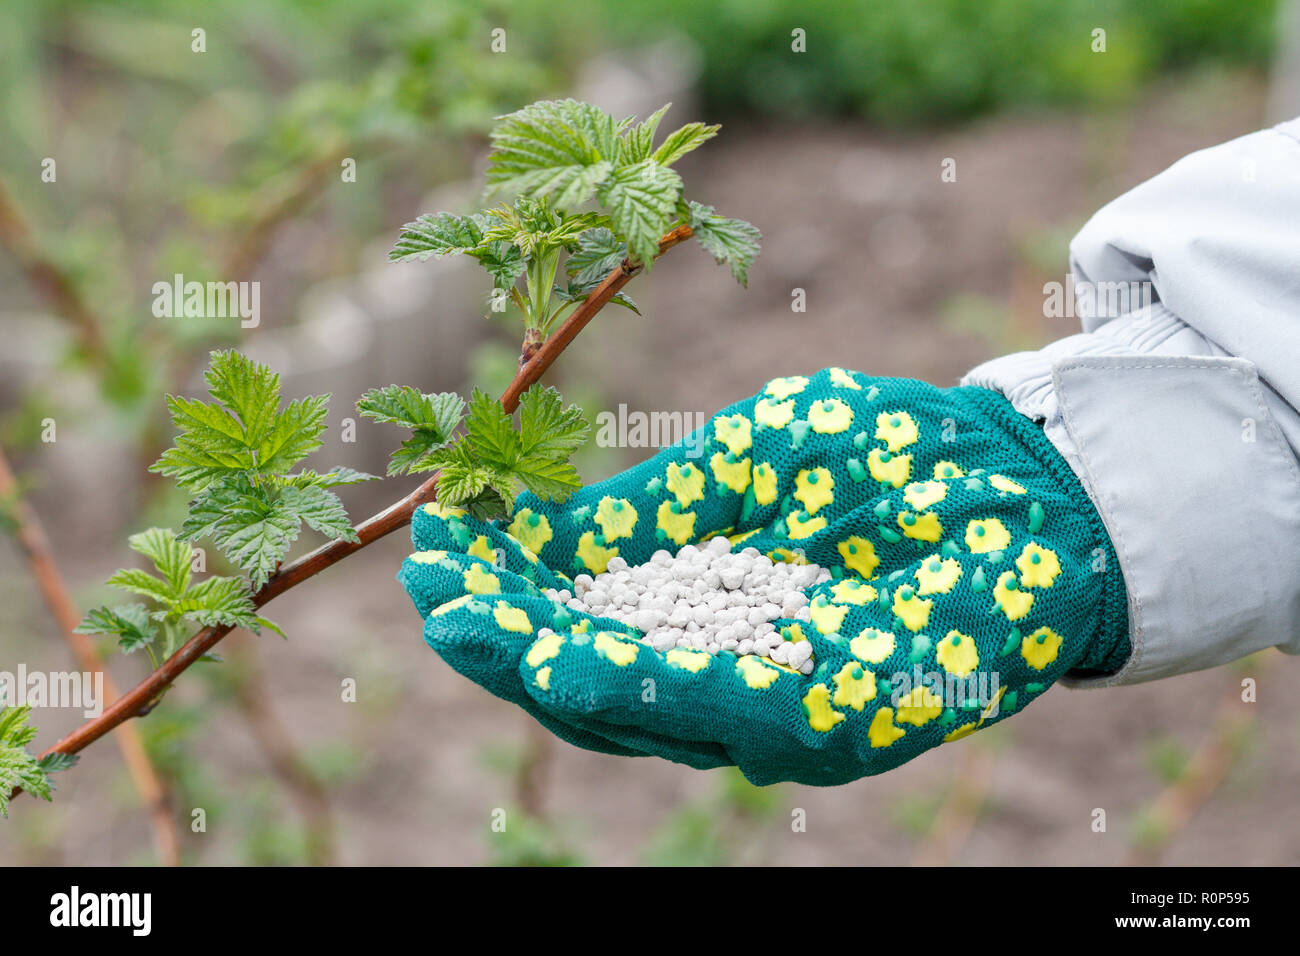 Farmer hand dressed in a glove holding chemical fertilizer next to the raspberry bushes in the garden. Spring garden care. Stock Photo